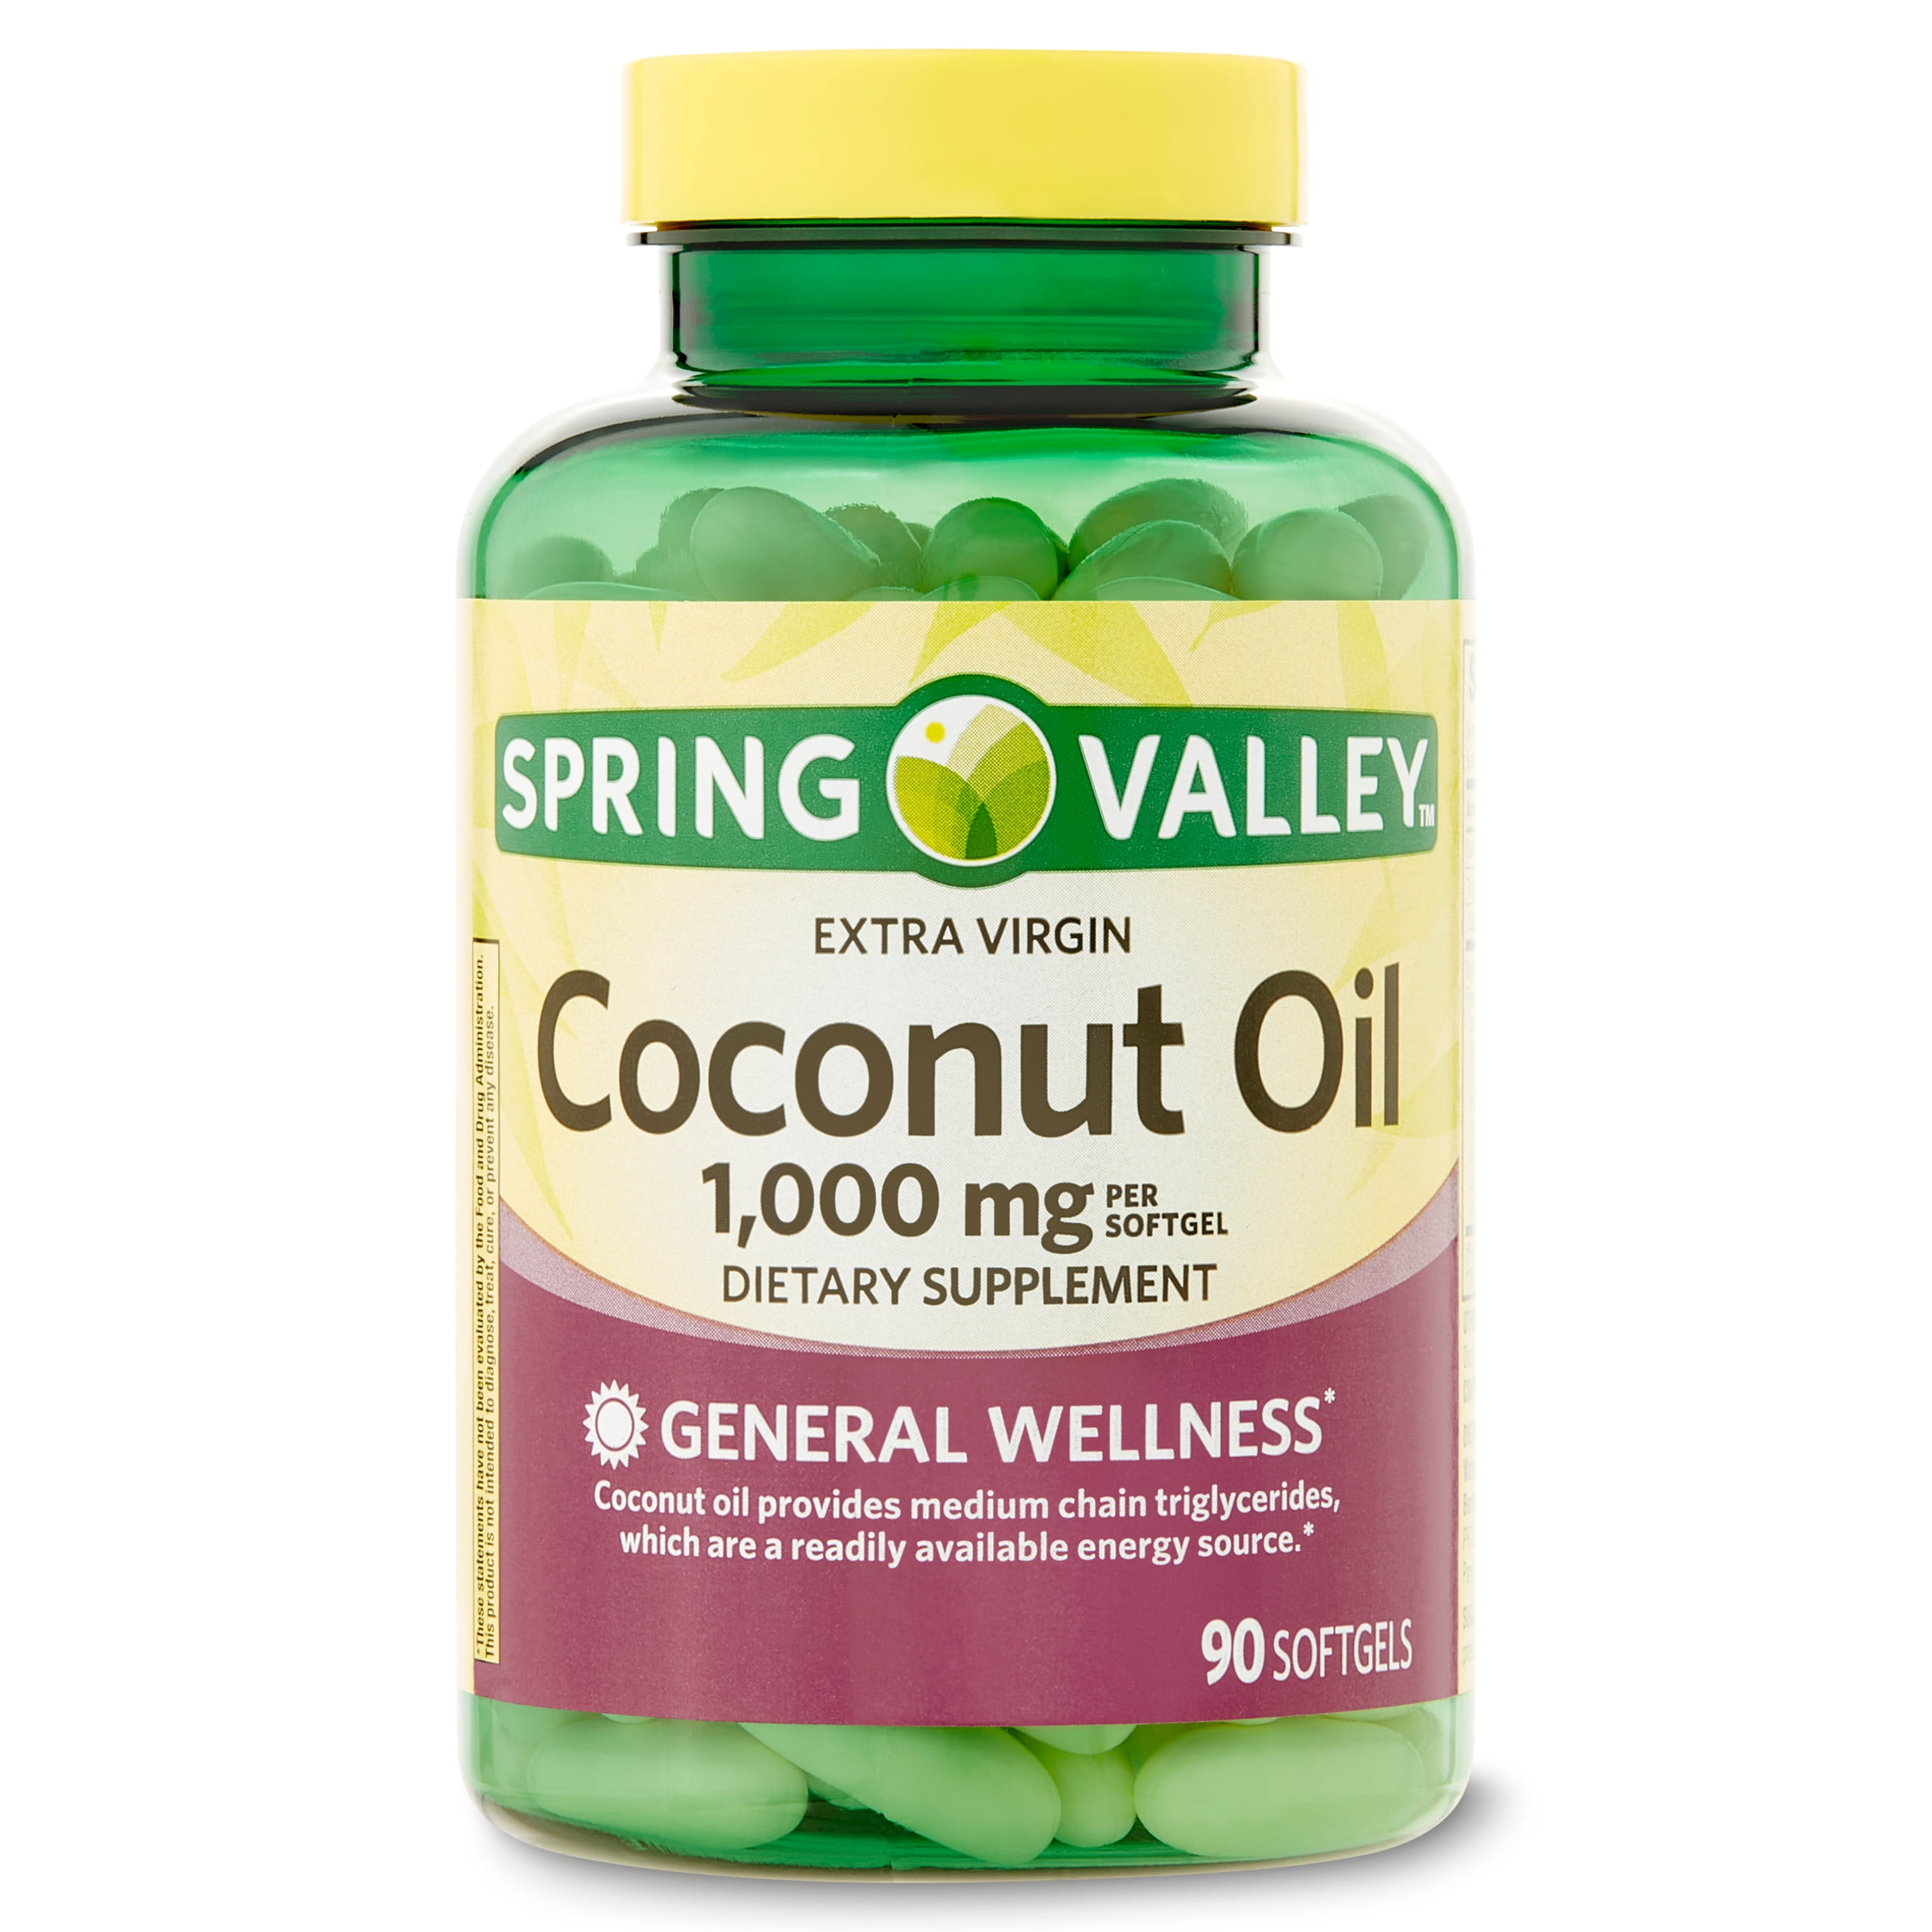 Spring Valley Extra Virgin Coconut Oil Dietary Supplement, Softgel Capsule, 1,000 mg, 90 Count